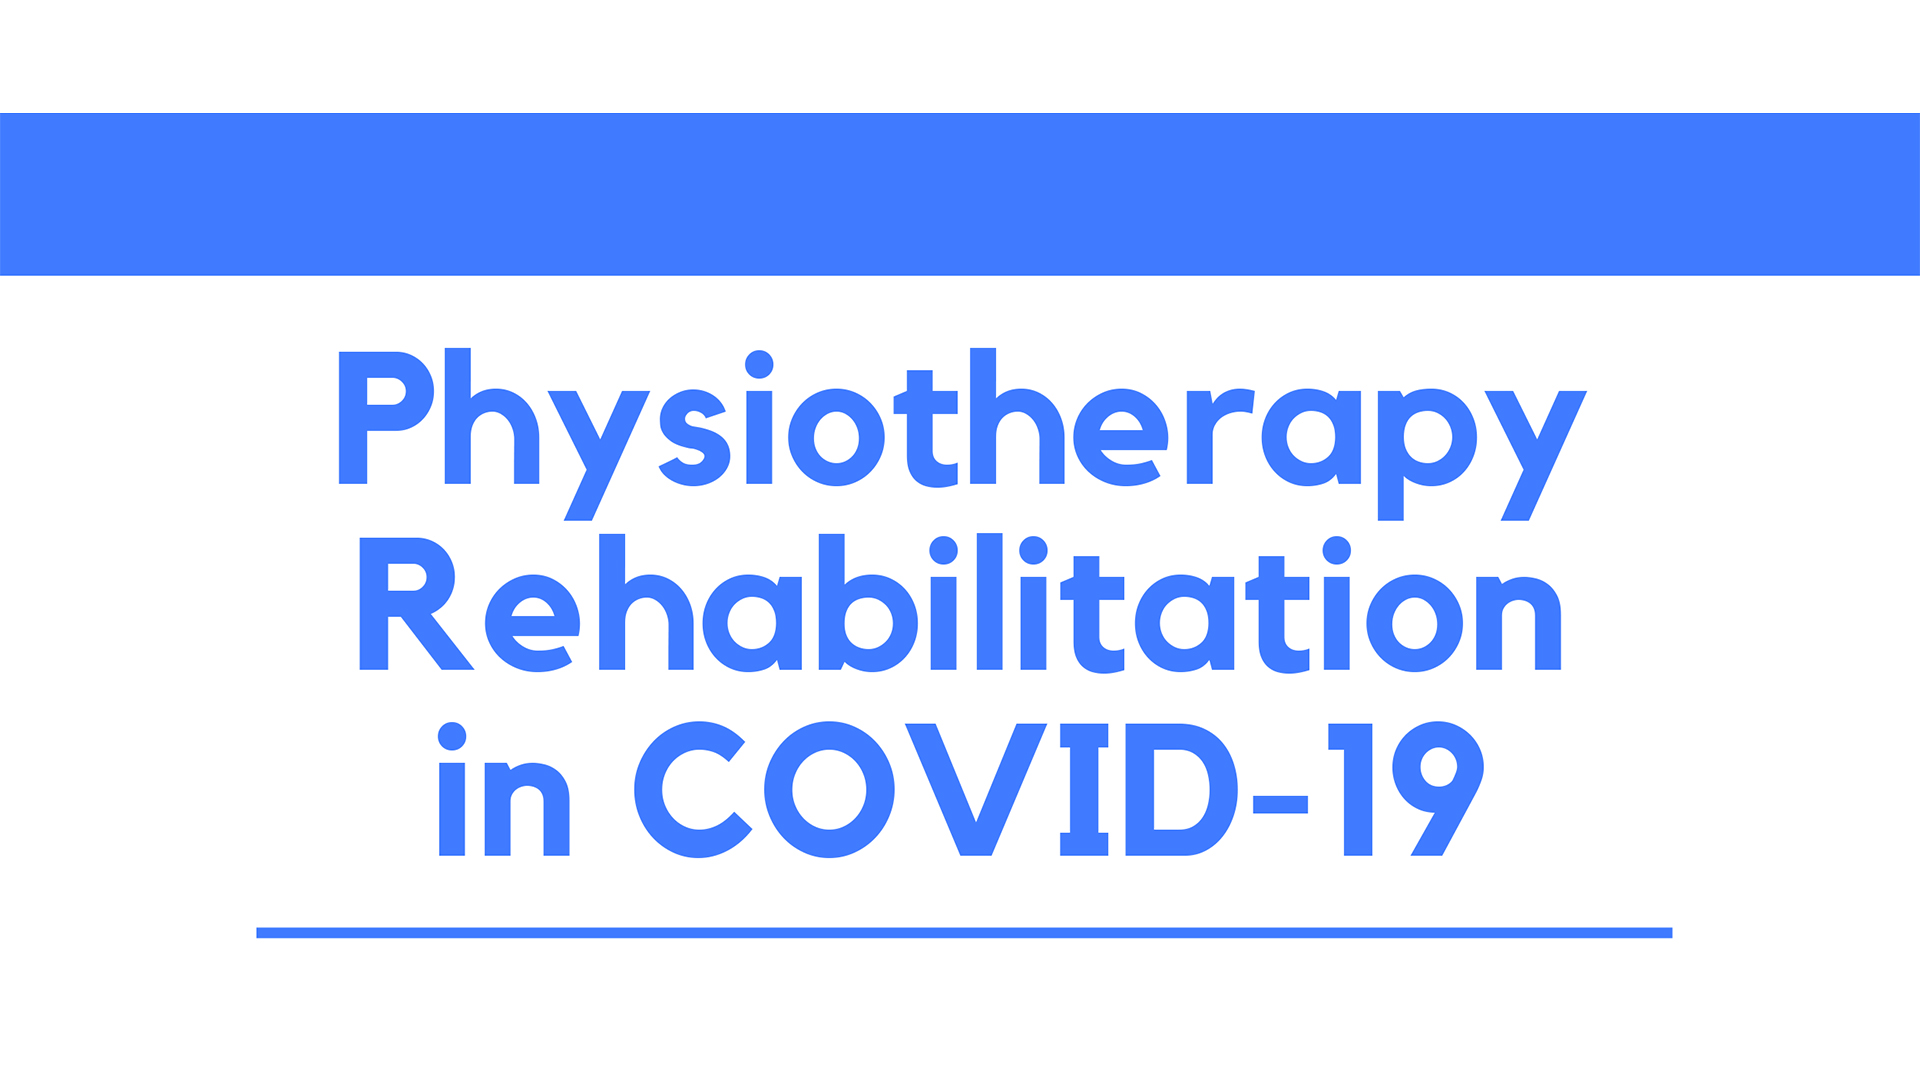 Physiotherapy Rehabilitation in COVID-19